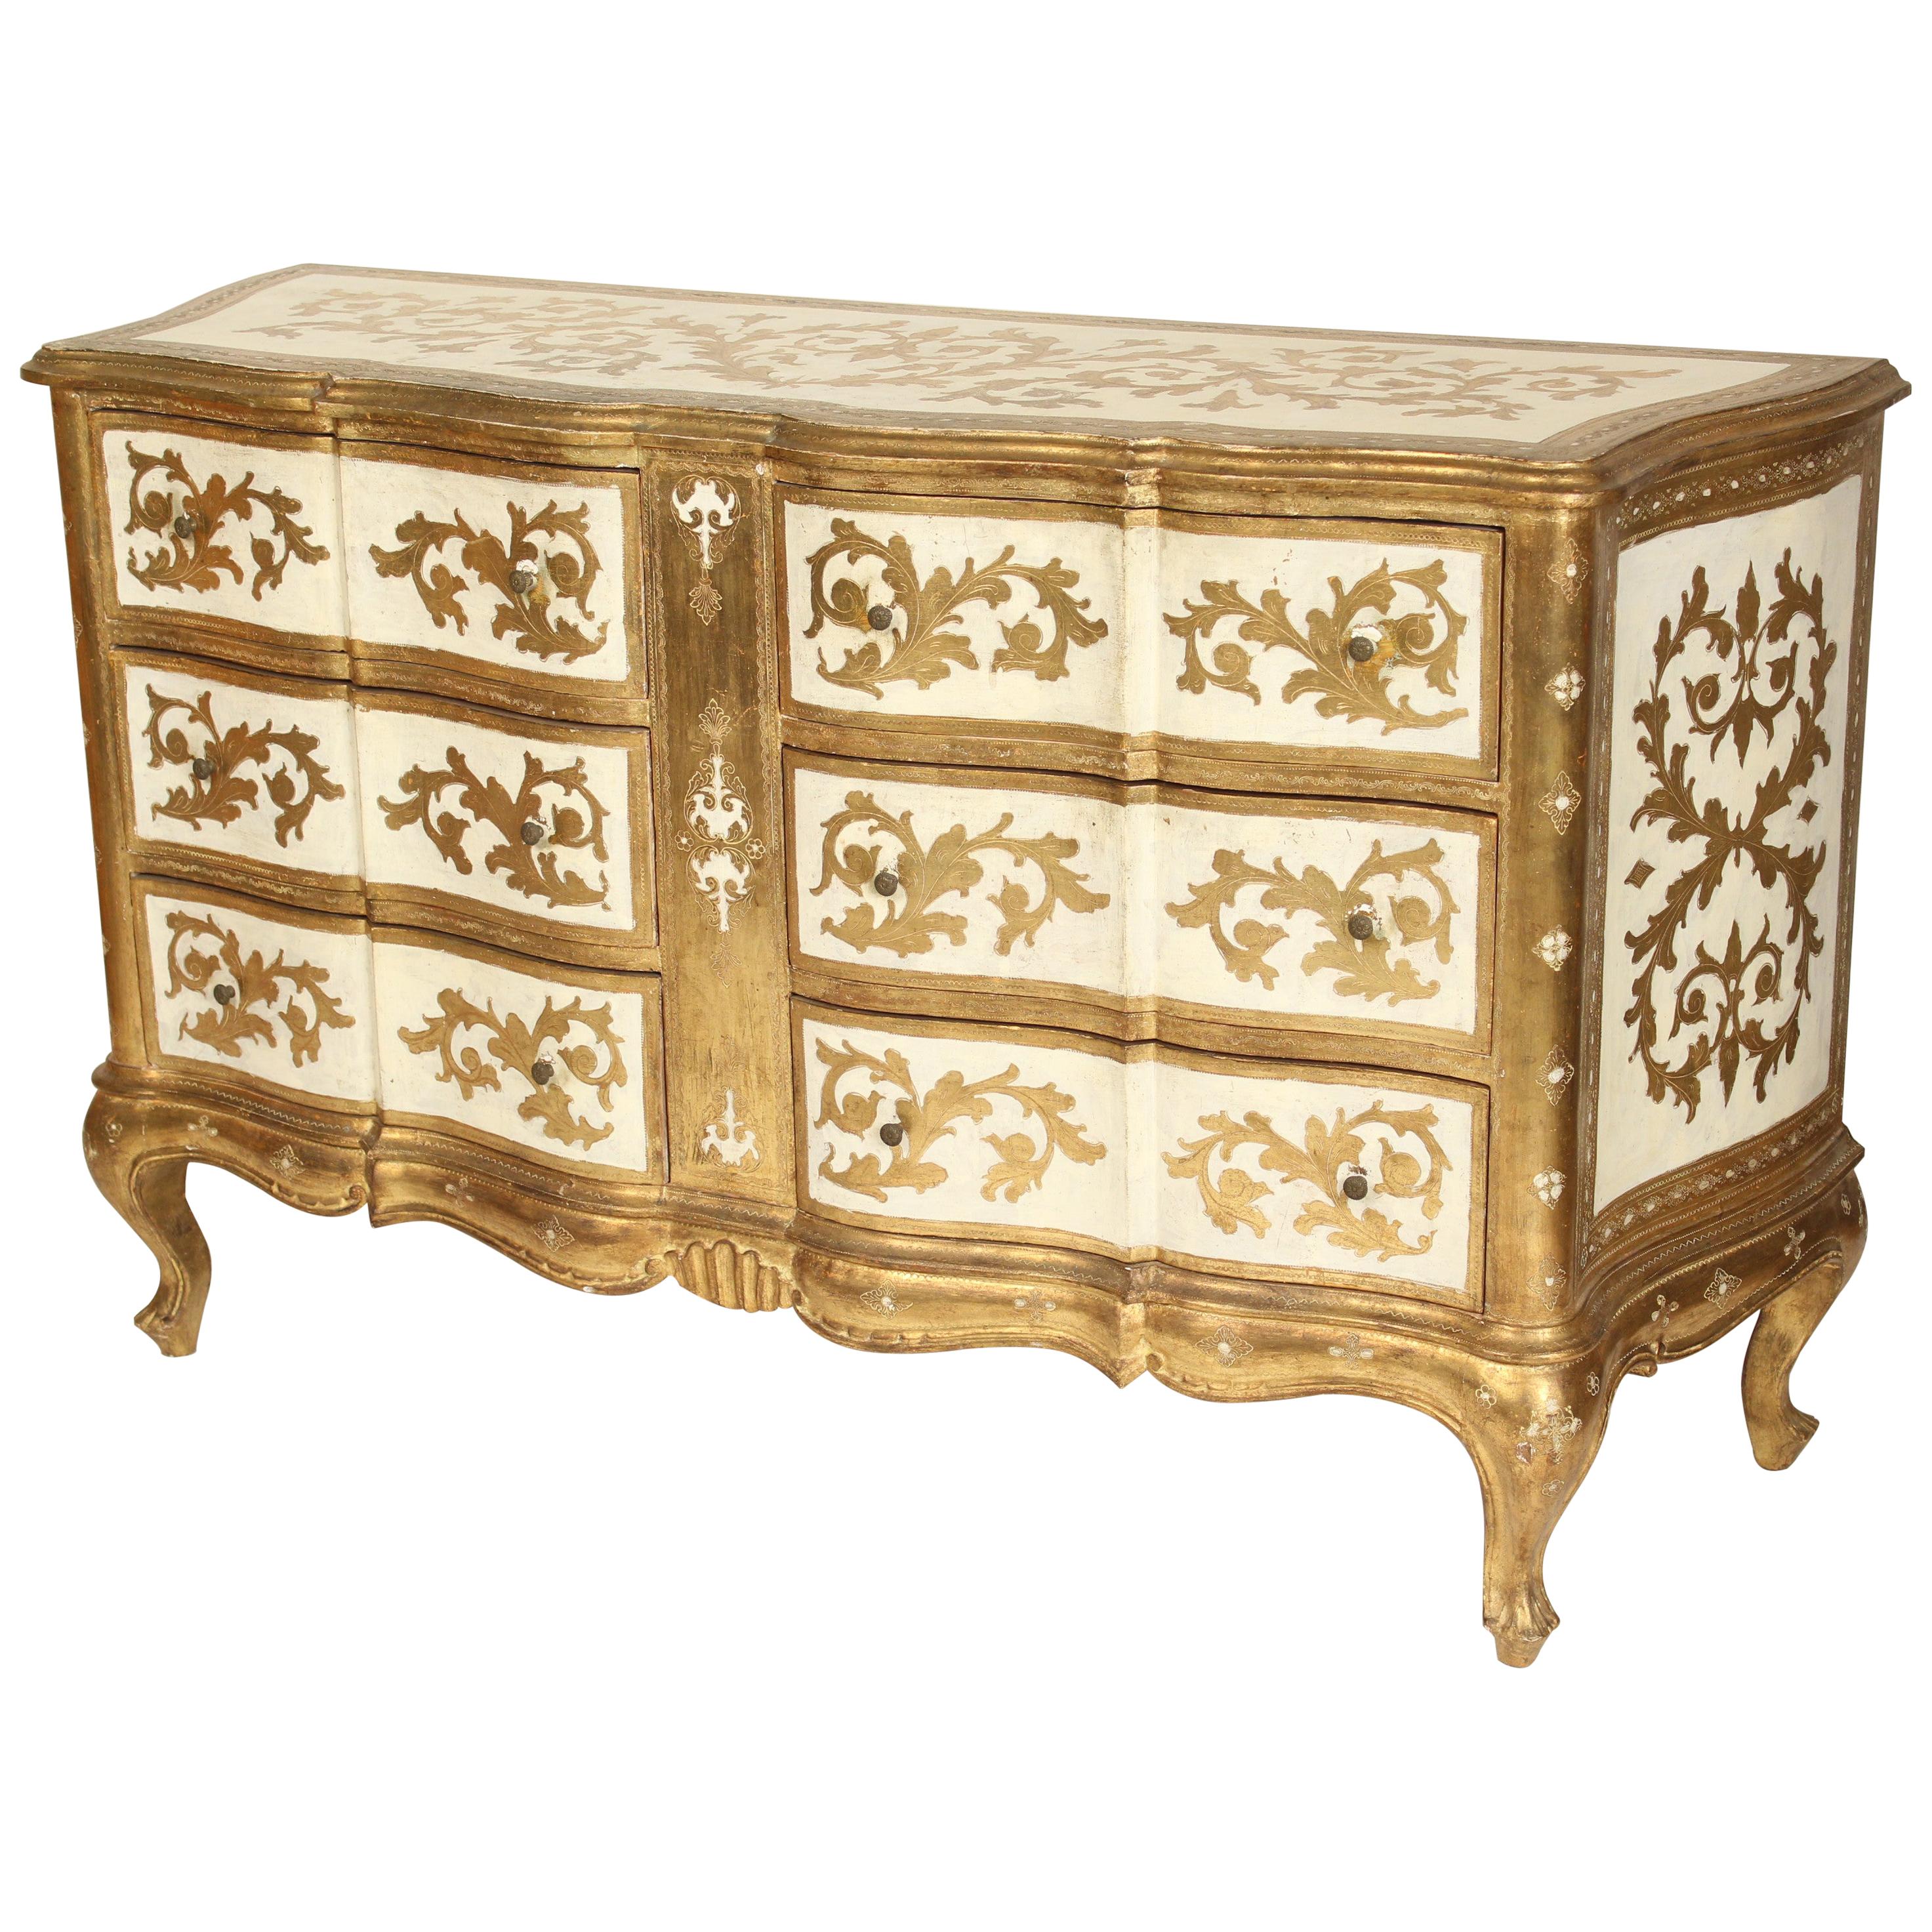 Italian Painted and Gilt Decorated Louis XV Style Dresser / Chest